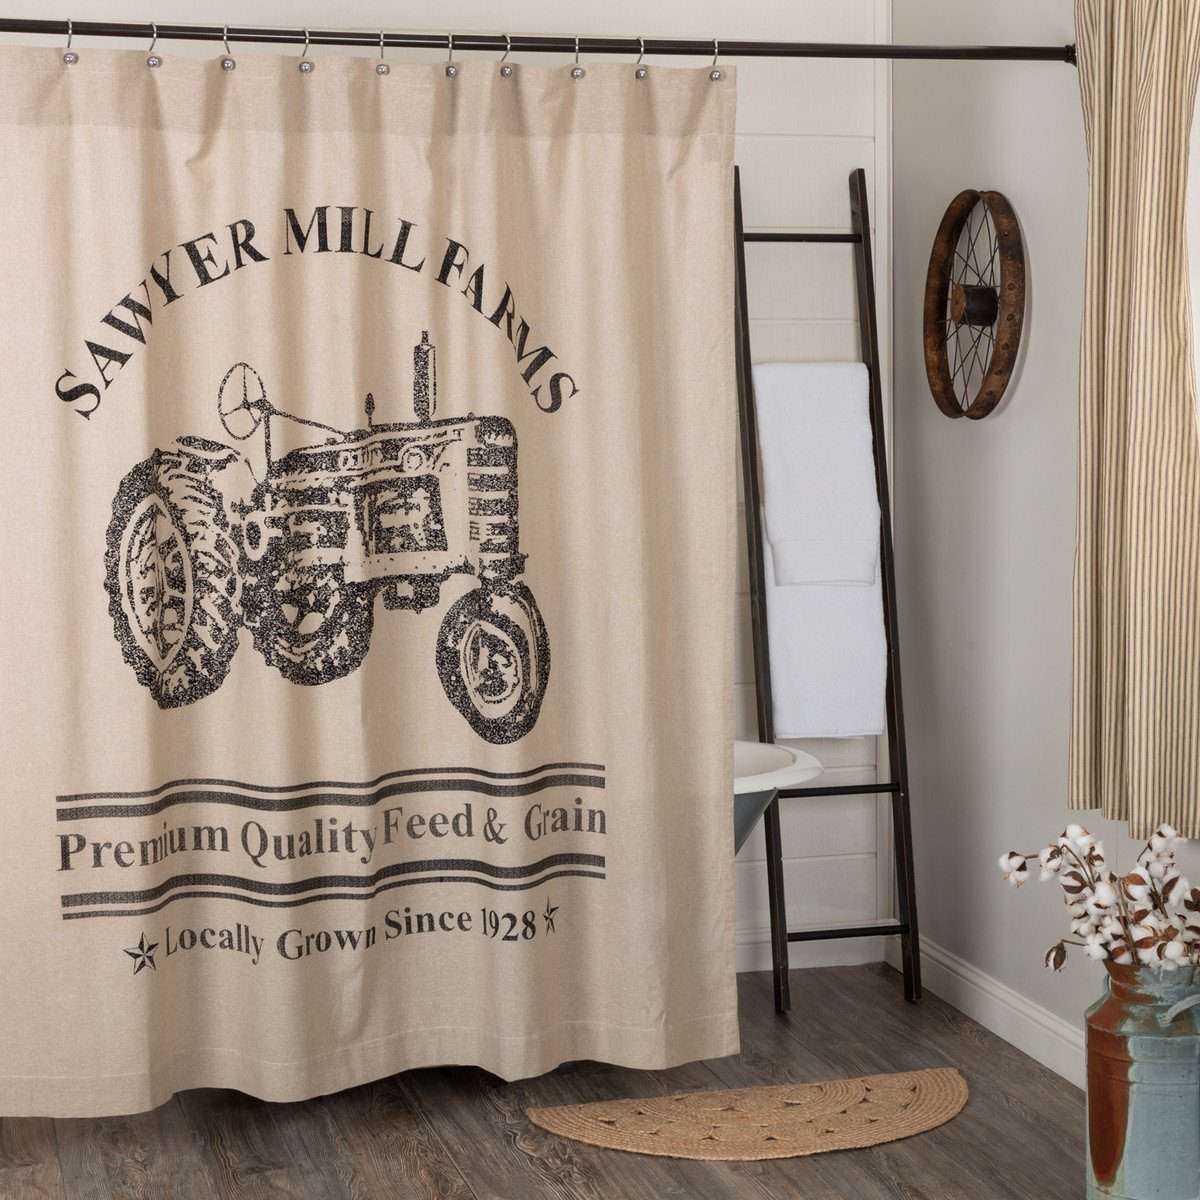 Sawyer Mill Charcoal/Red Tractor Shower Curtain 72"x72" curtain VHC Brands Charcoal 